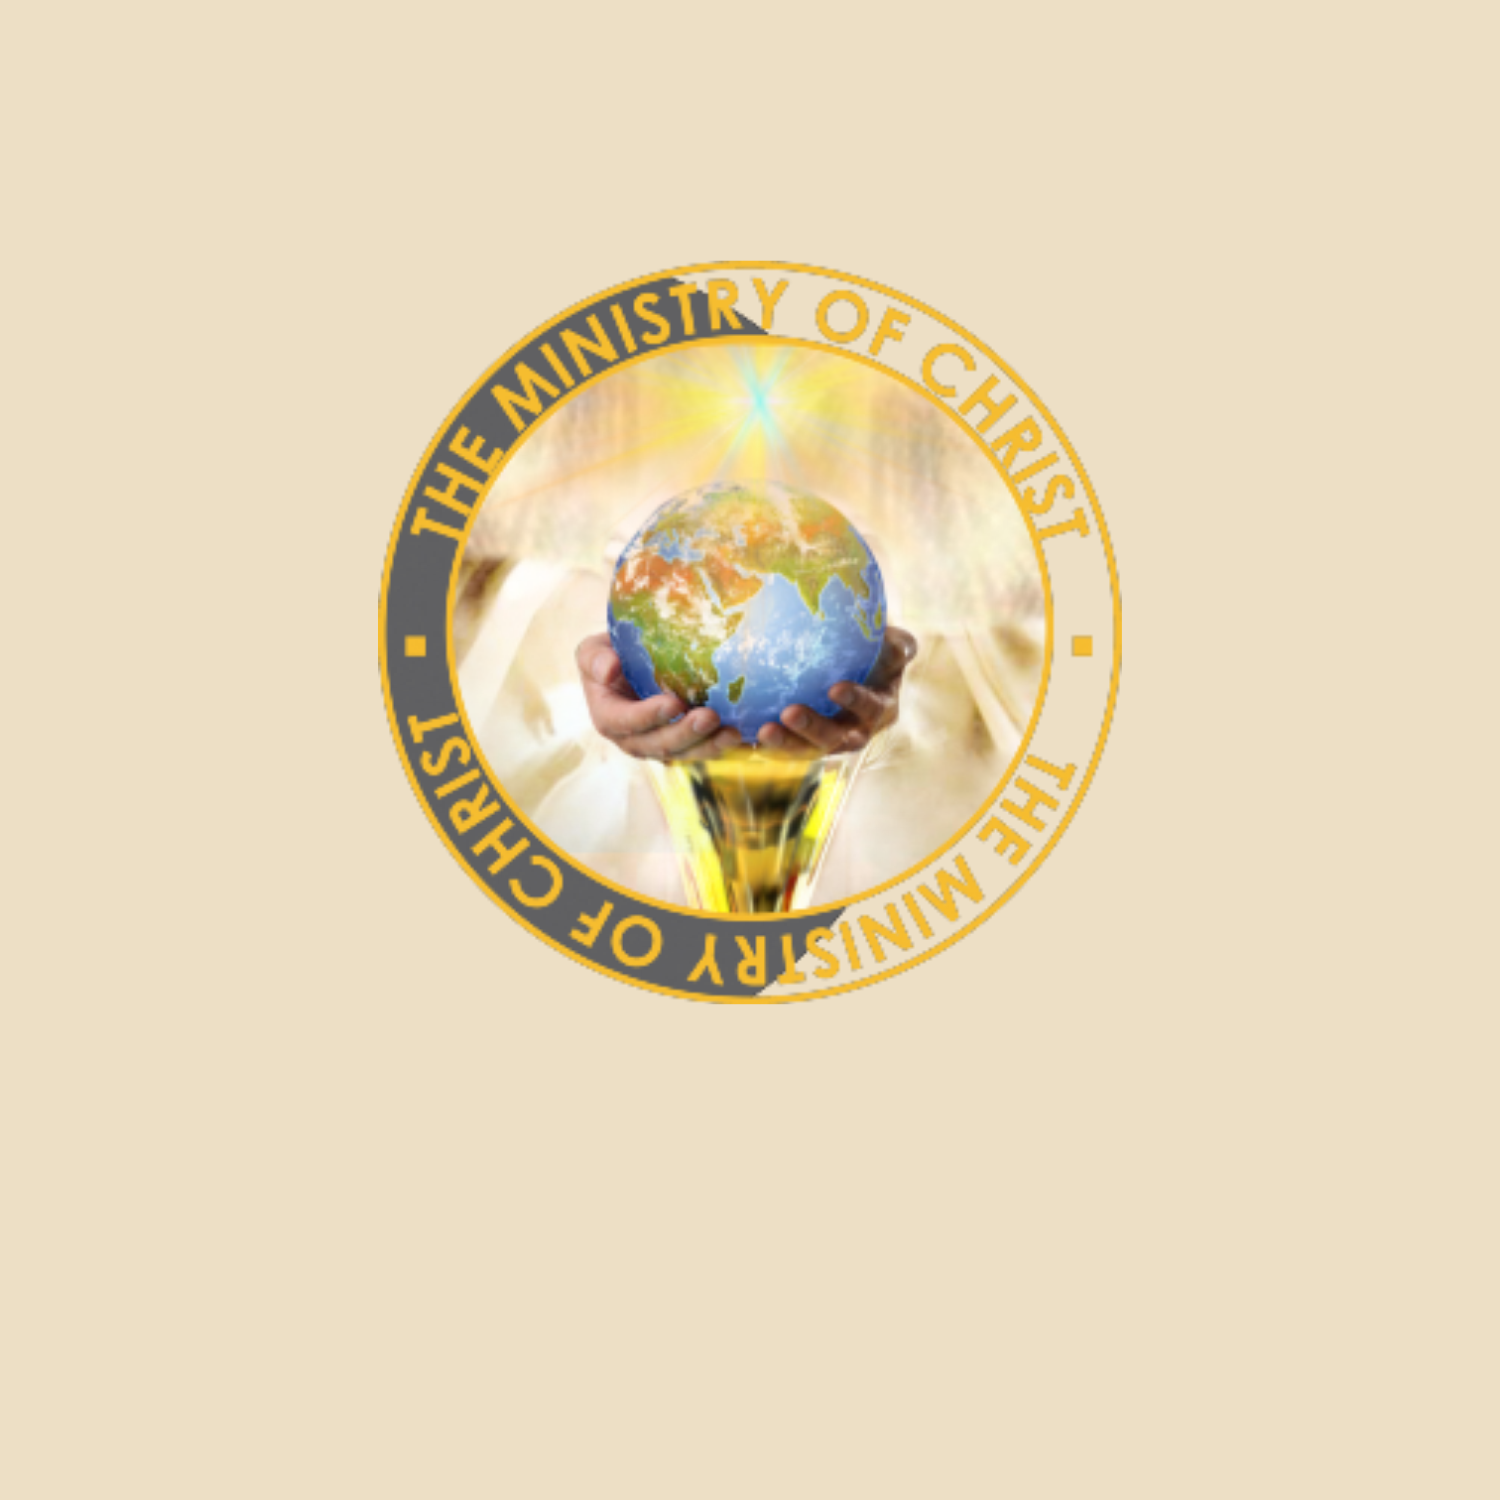 Logo of Ministry of Christ